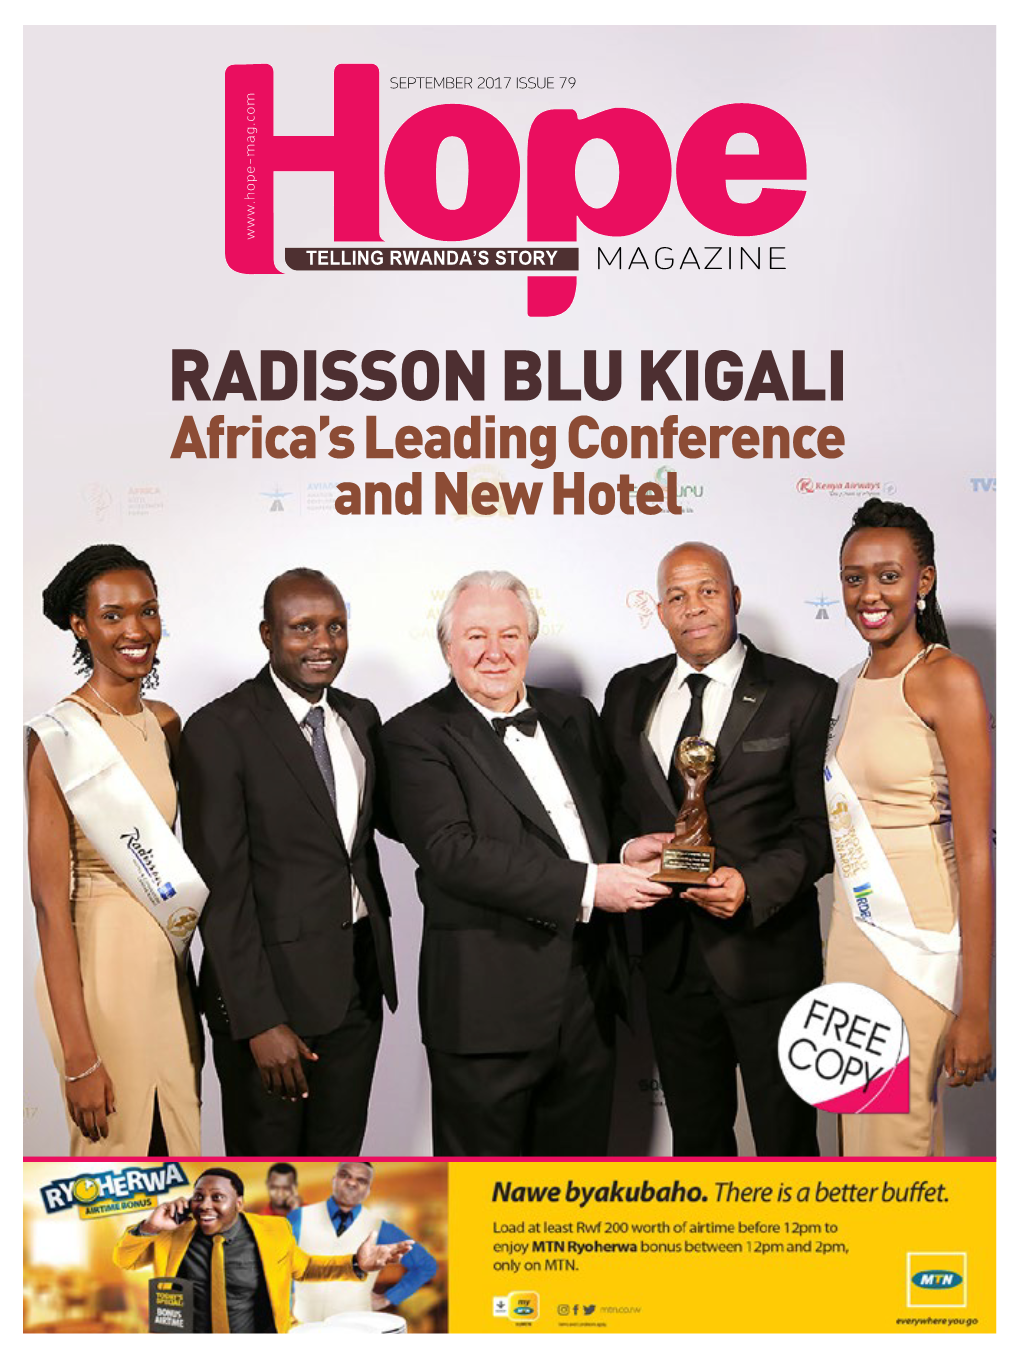 RADISSON BLU KIGALI Africa’S Leading Conference and New Hotel